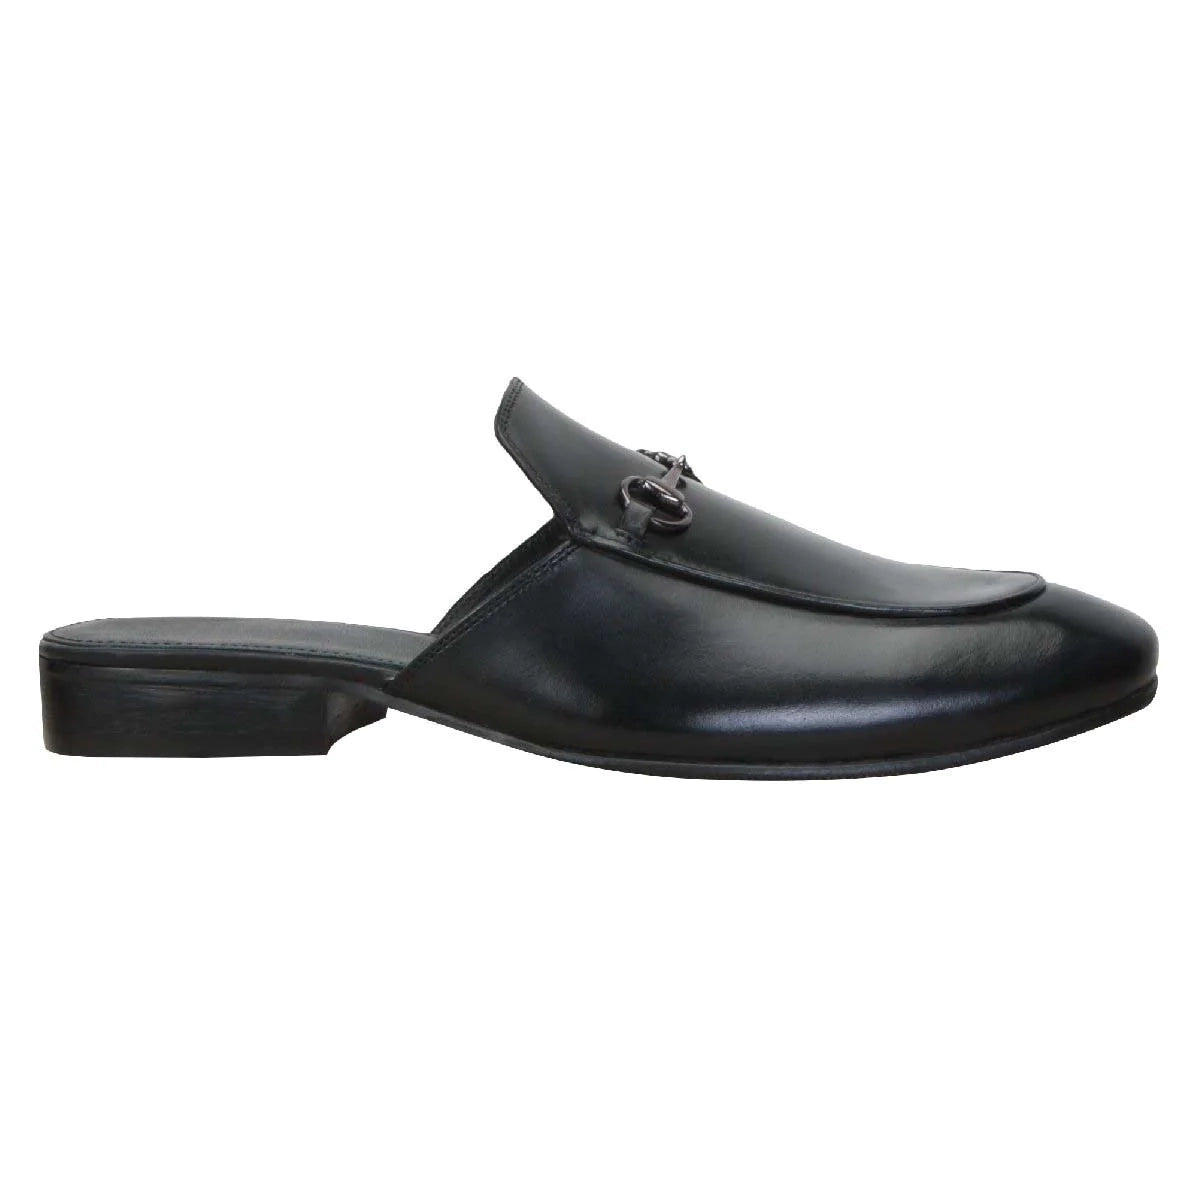 Black Leather Formal Mules